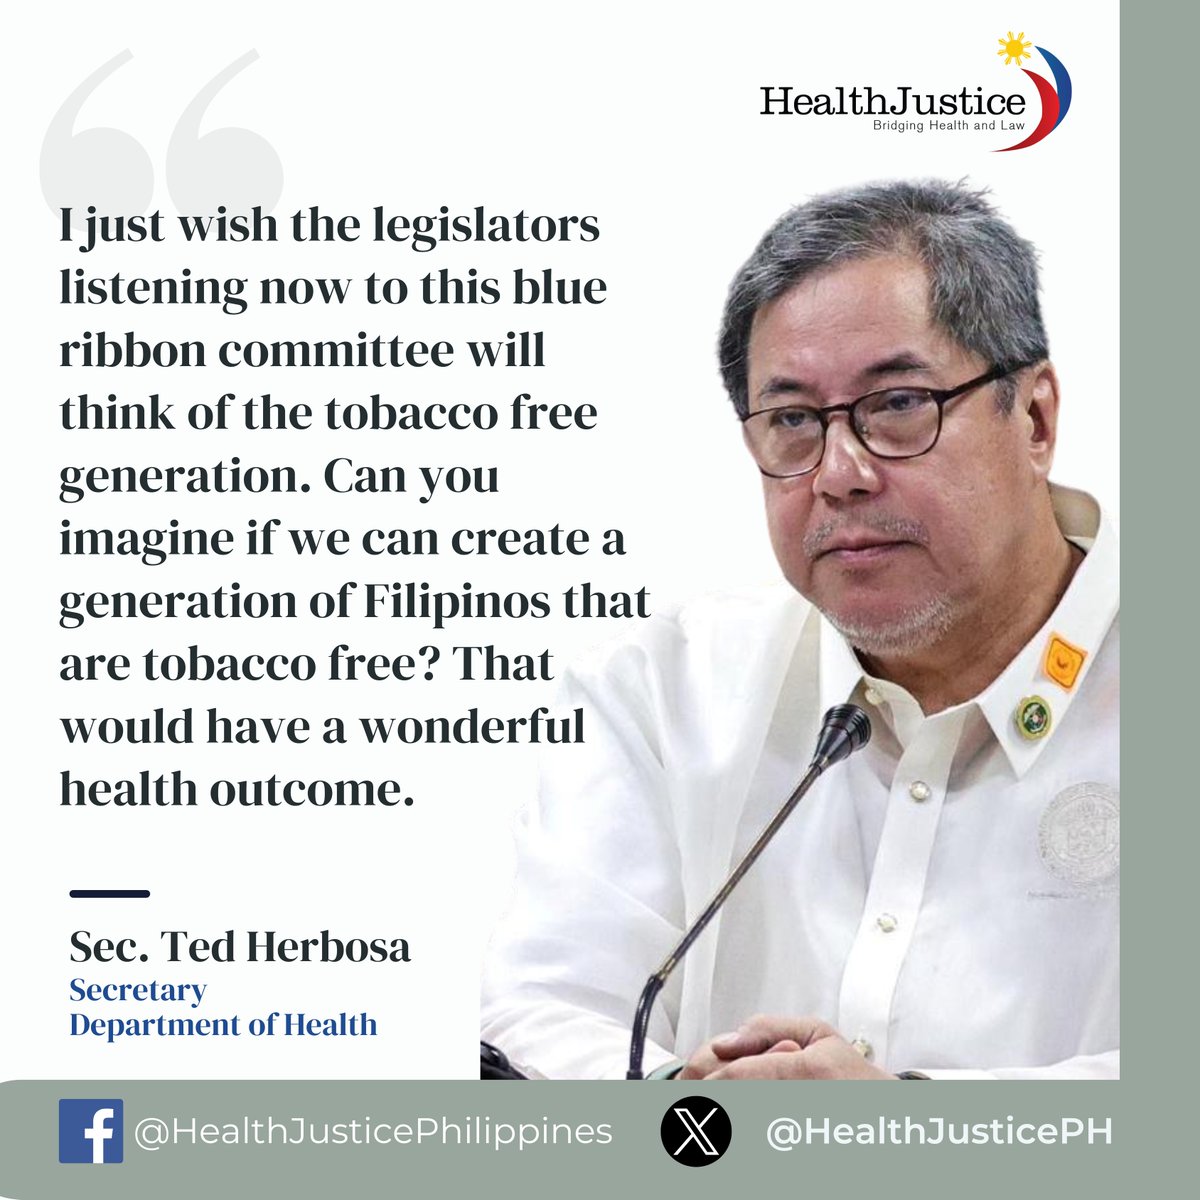 'What's the tobacco free generation? So it's an idea of attaining health through creating a cohort, a whole generation of children and youth not exposed to tobacco, not exposed to tobacco'- Sec. Ted Herbosa

read full article below:

healthjustice.ph/dirty-ashtray-…